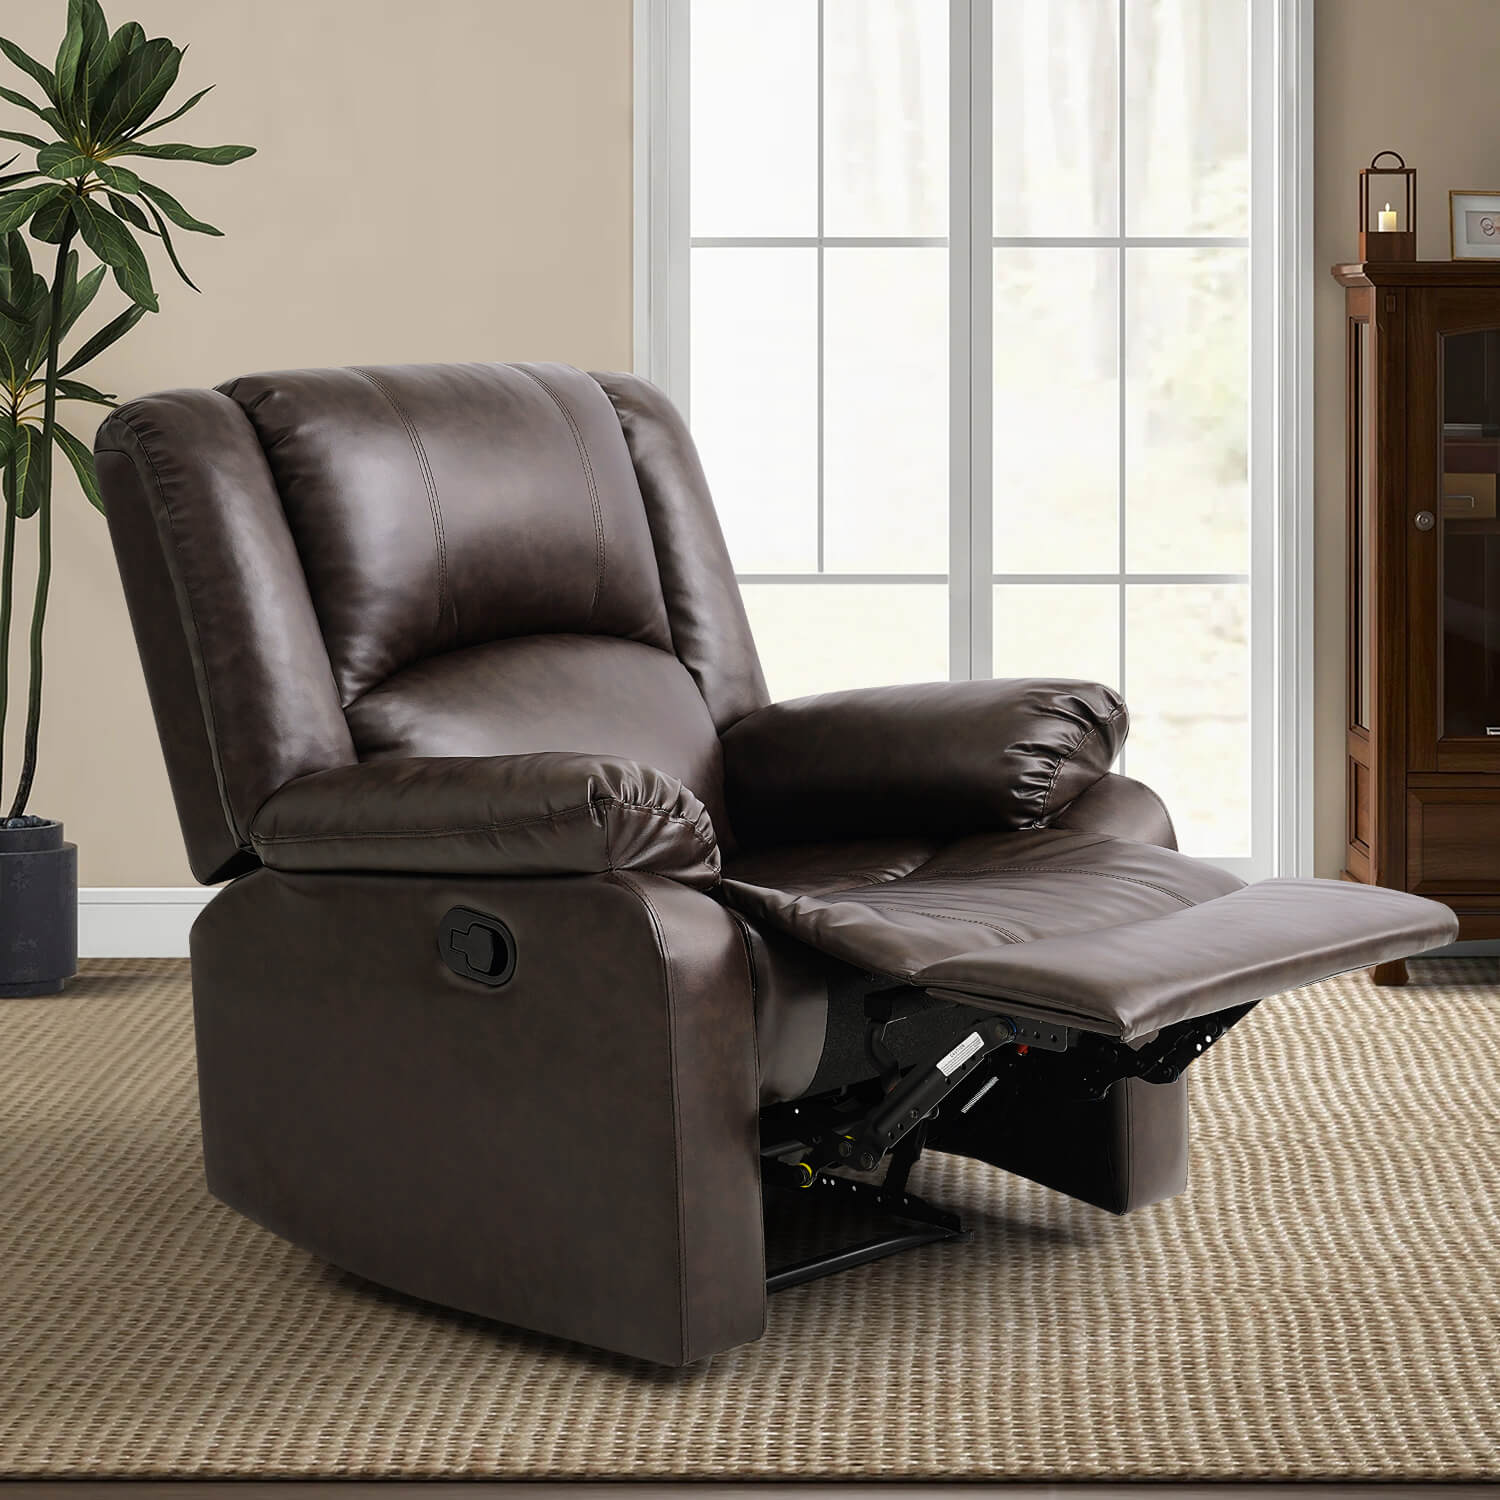 3 Position Manual Leather Recliner Chair for Living Room, Brown